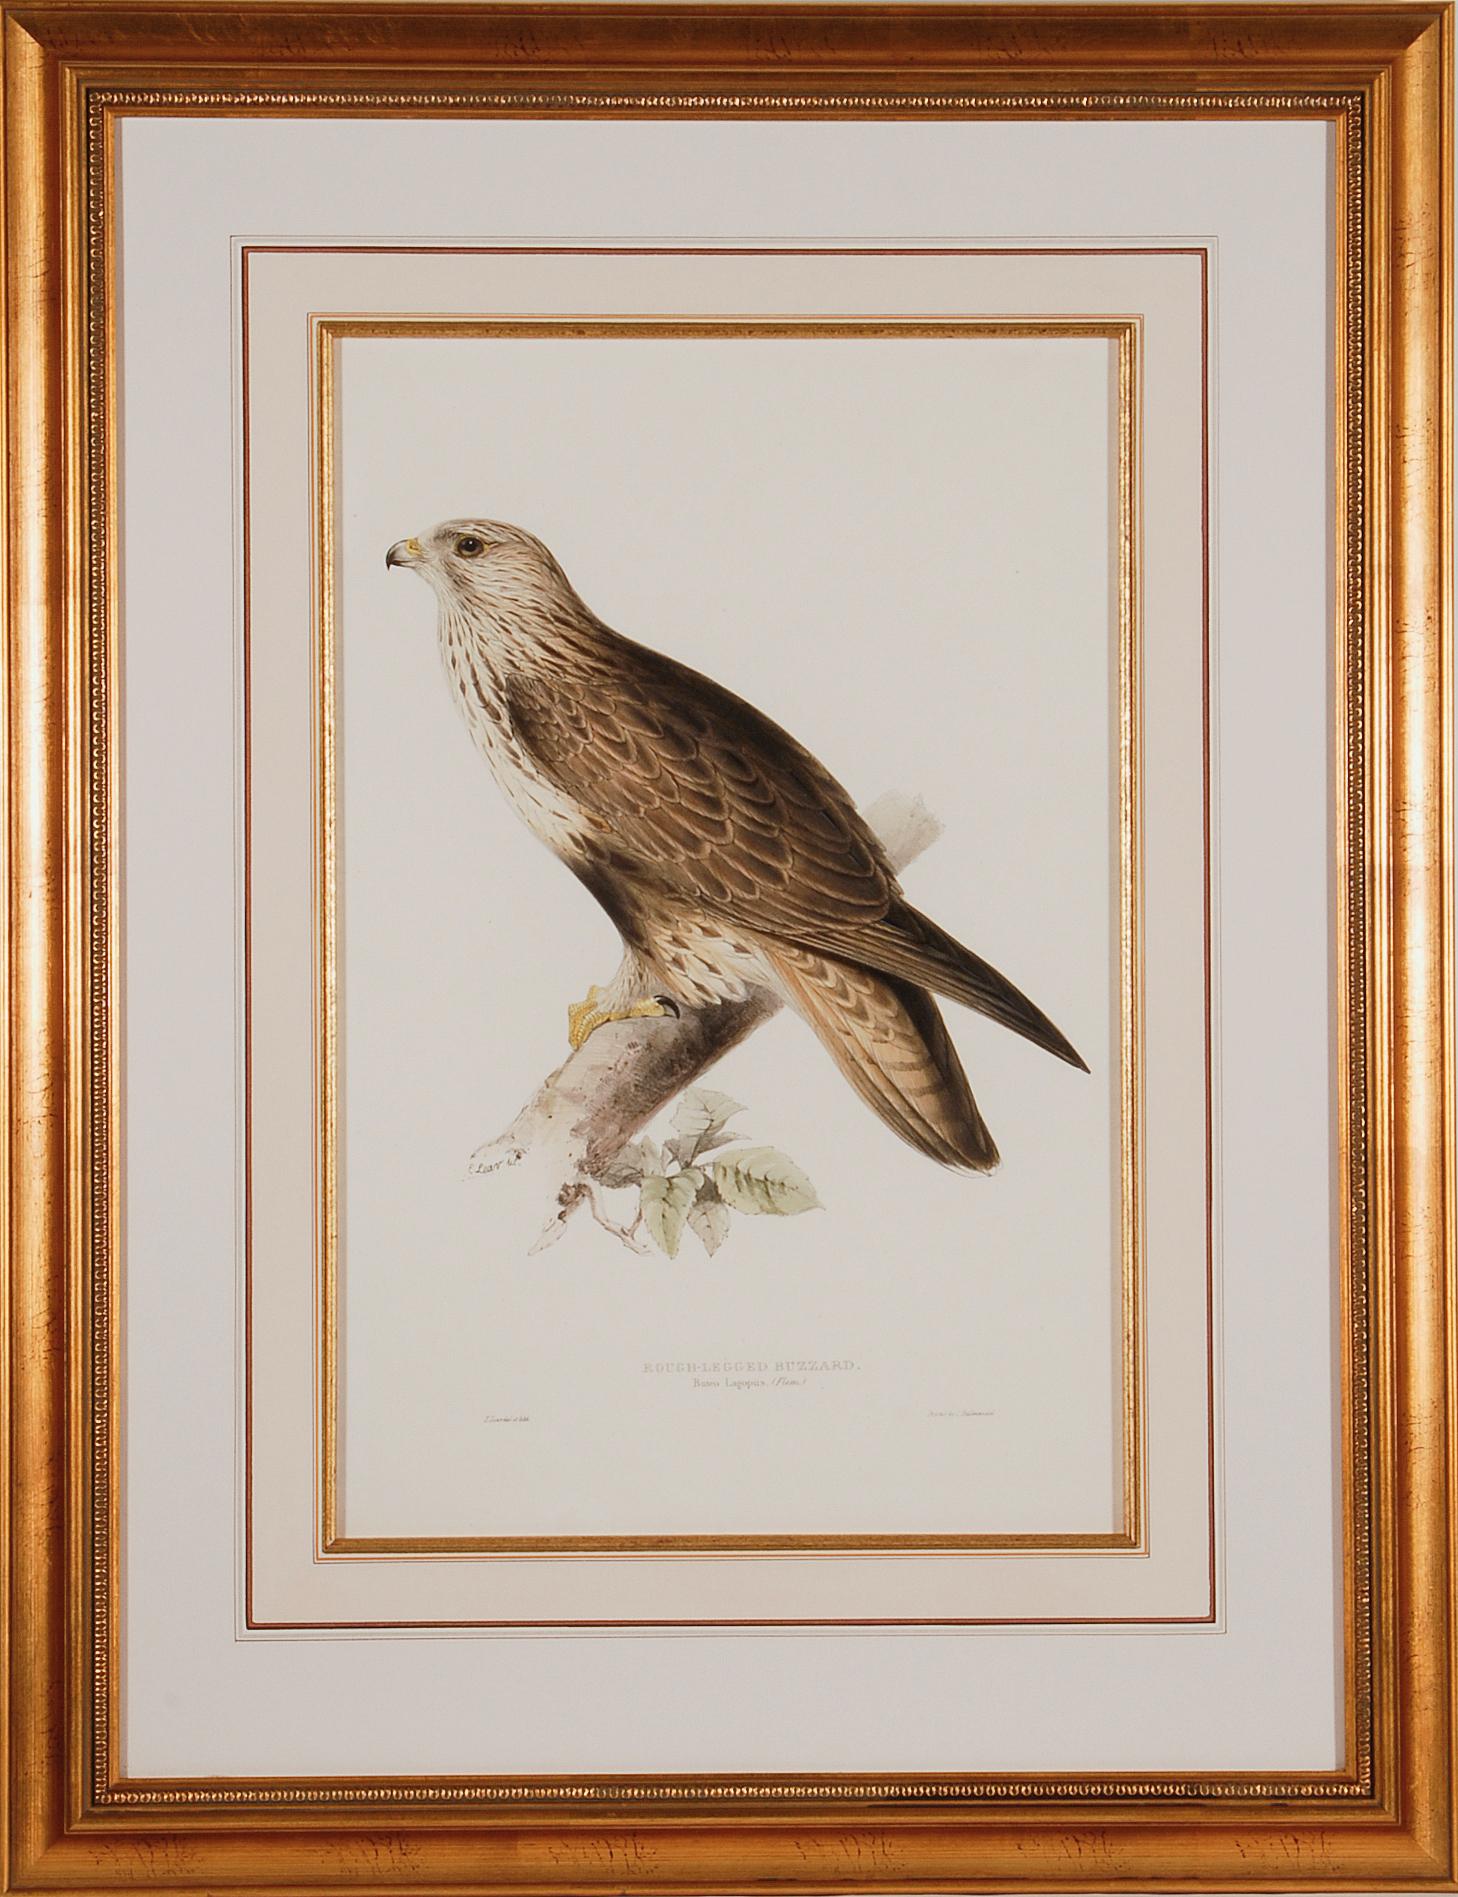 This is an original 19th century hand-colored folio-sized lithograph entitled "Archibuteo Lagopus" (Rough-Legged Buzzard) by John Gould and Edward Lear, from Gould's "Birds of Great Britain", published in London between 1862 and 1873. The print